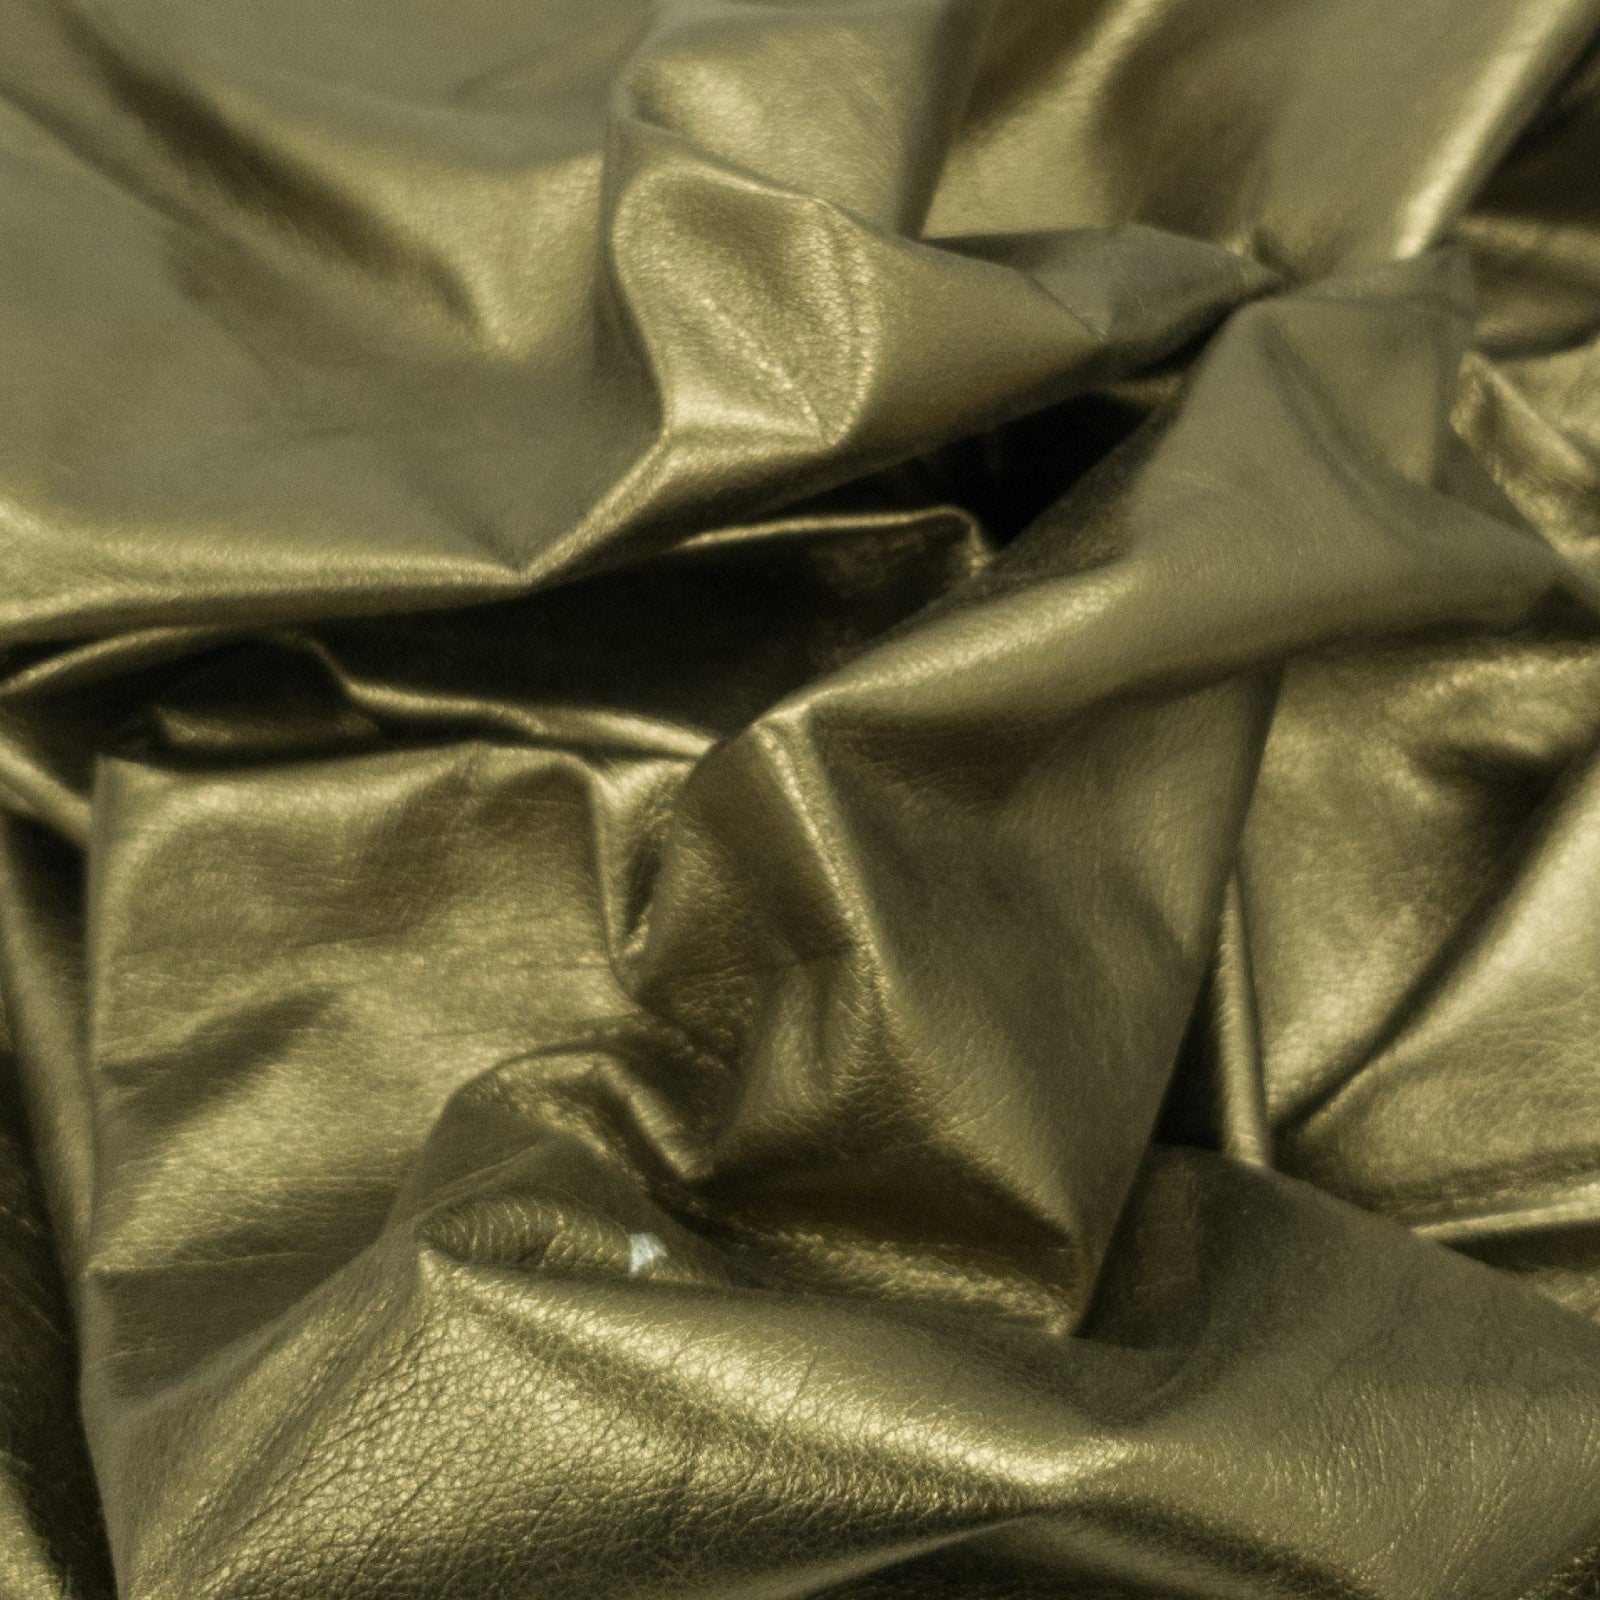 Slight Shimmer, 4-7 Sq Ft, Lamb Hides, Fools Gold / 5-6 | The Leather Guy